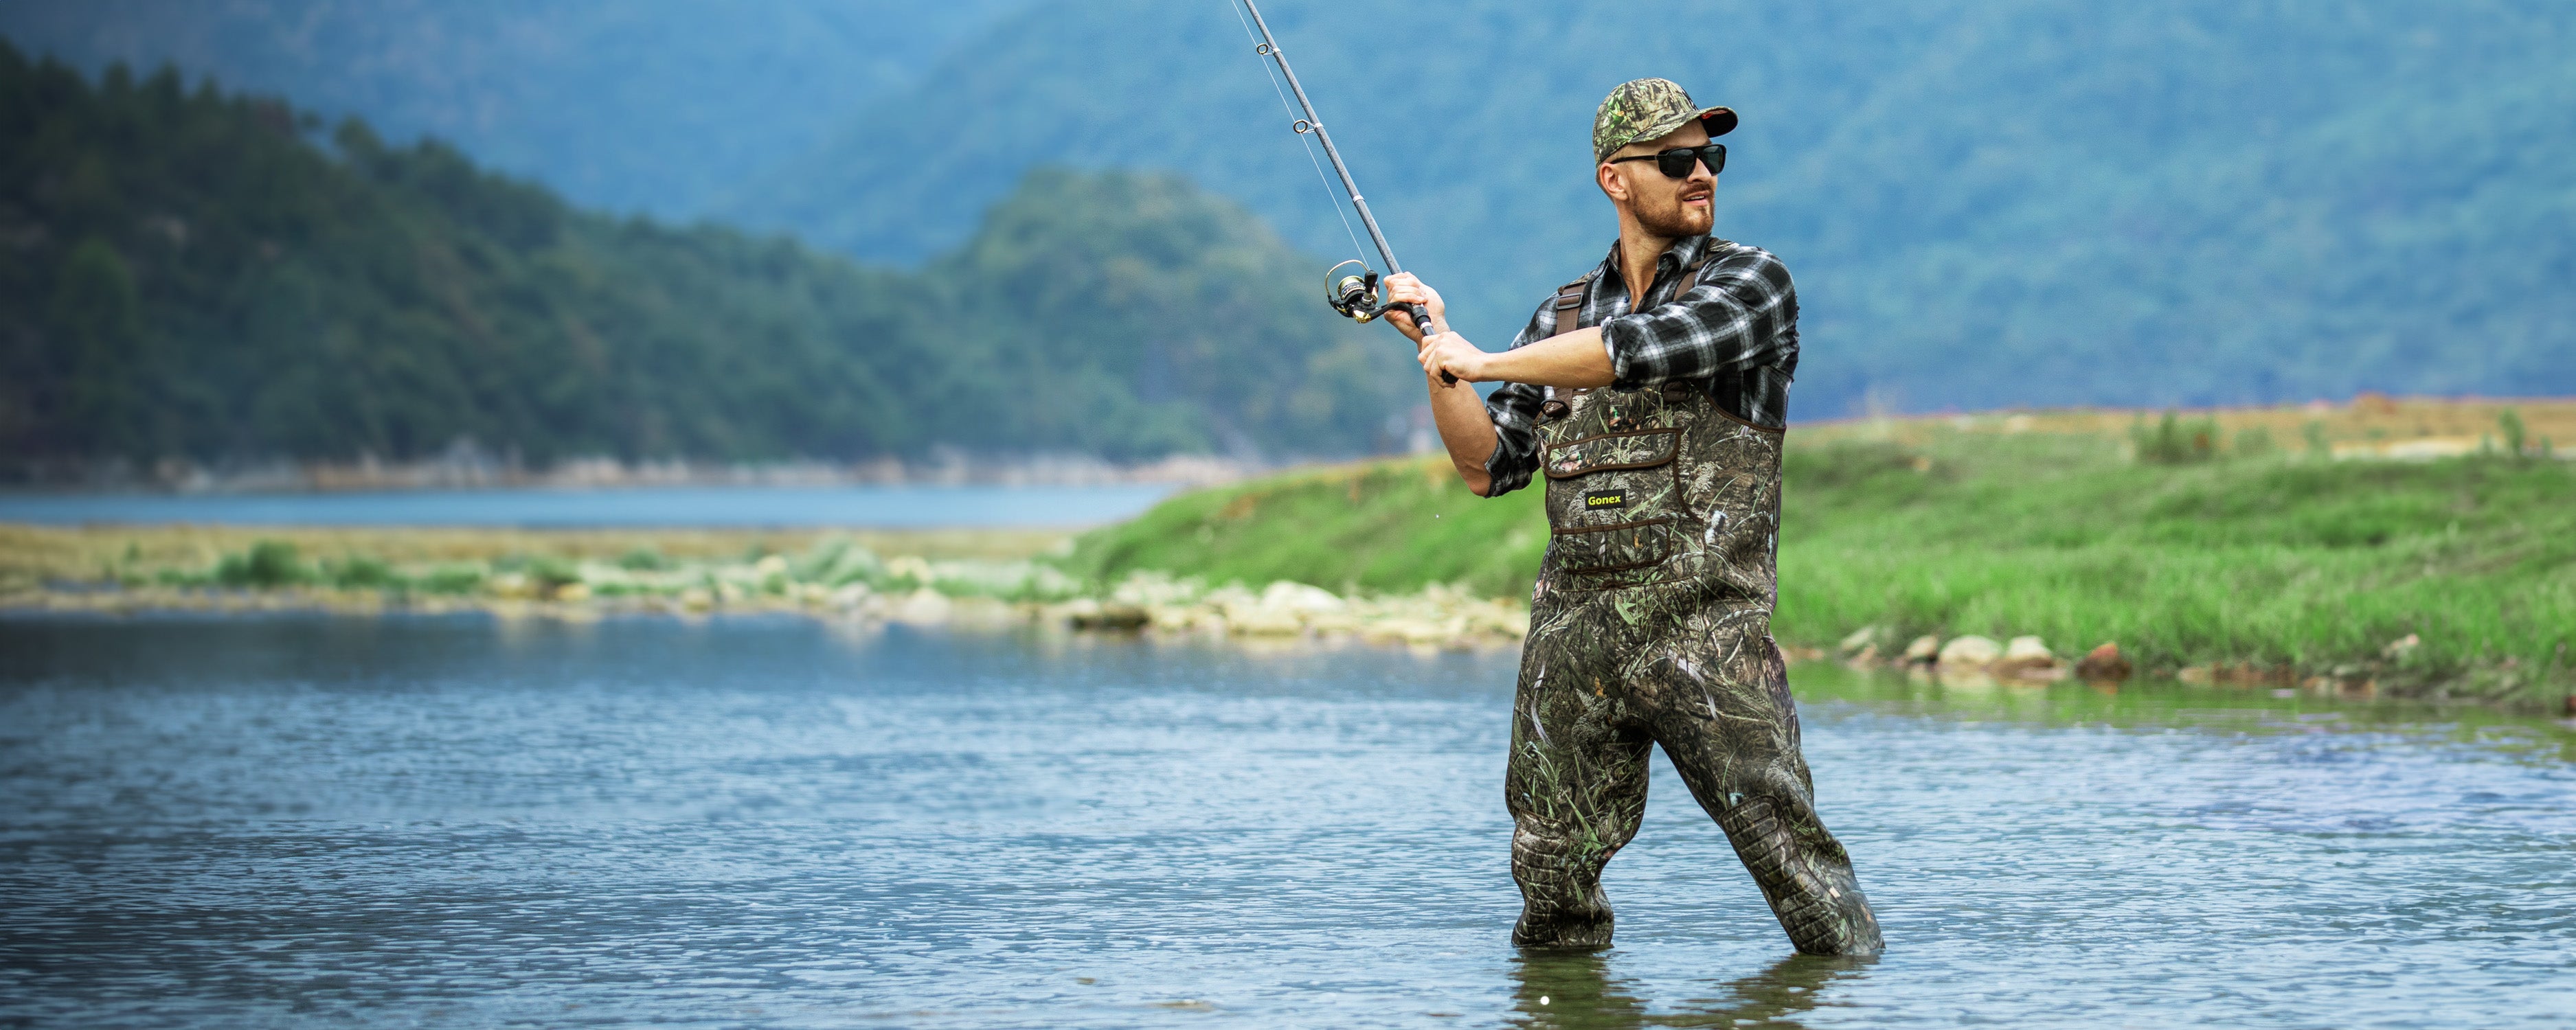 Gonex Fishing Gear for Your Next Fishing Adventure